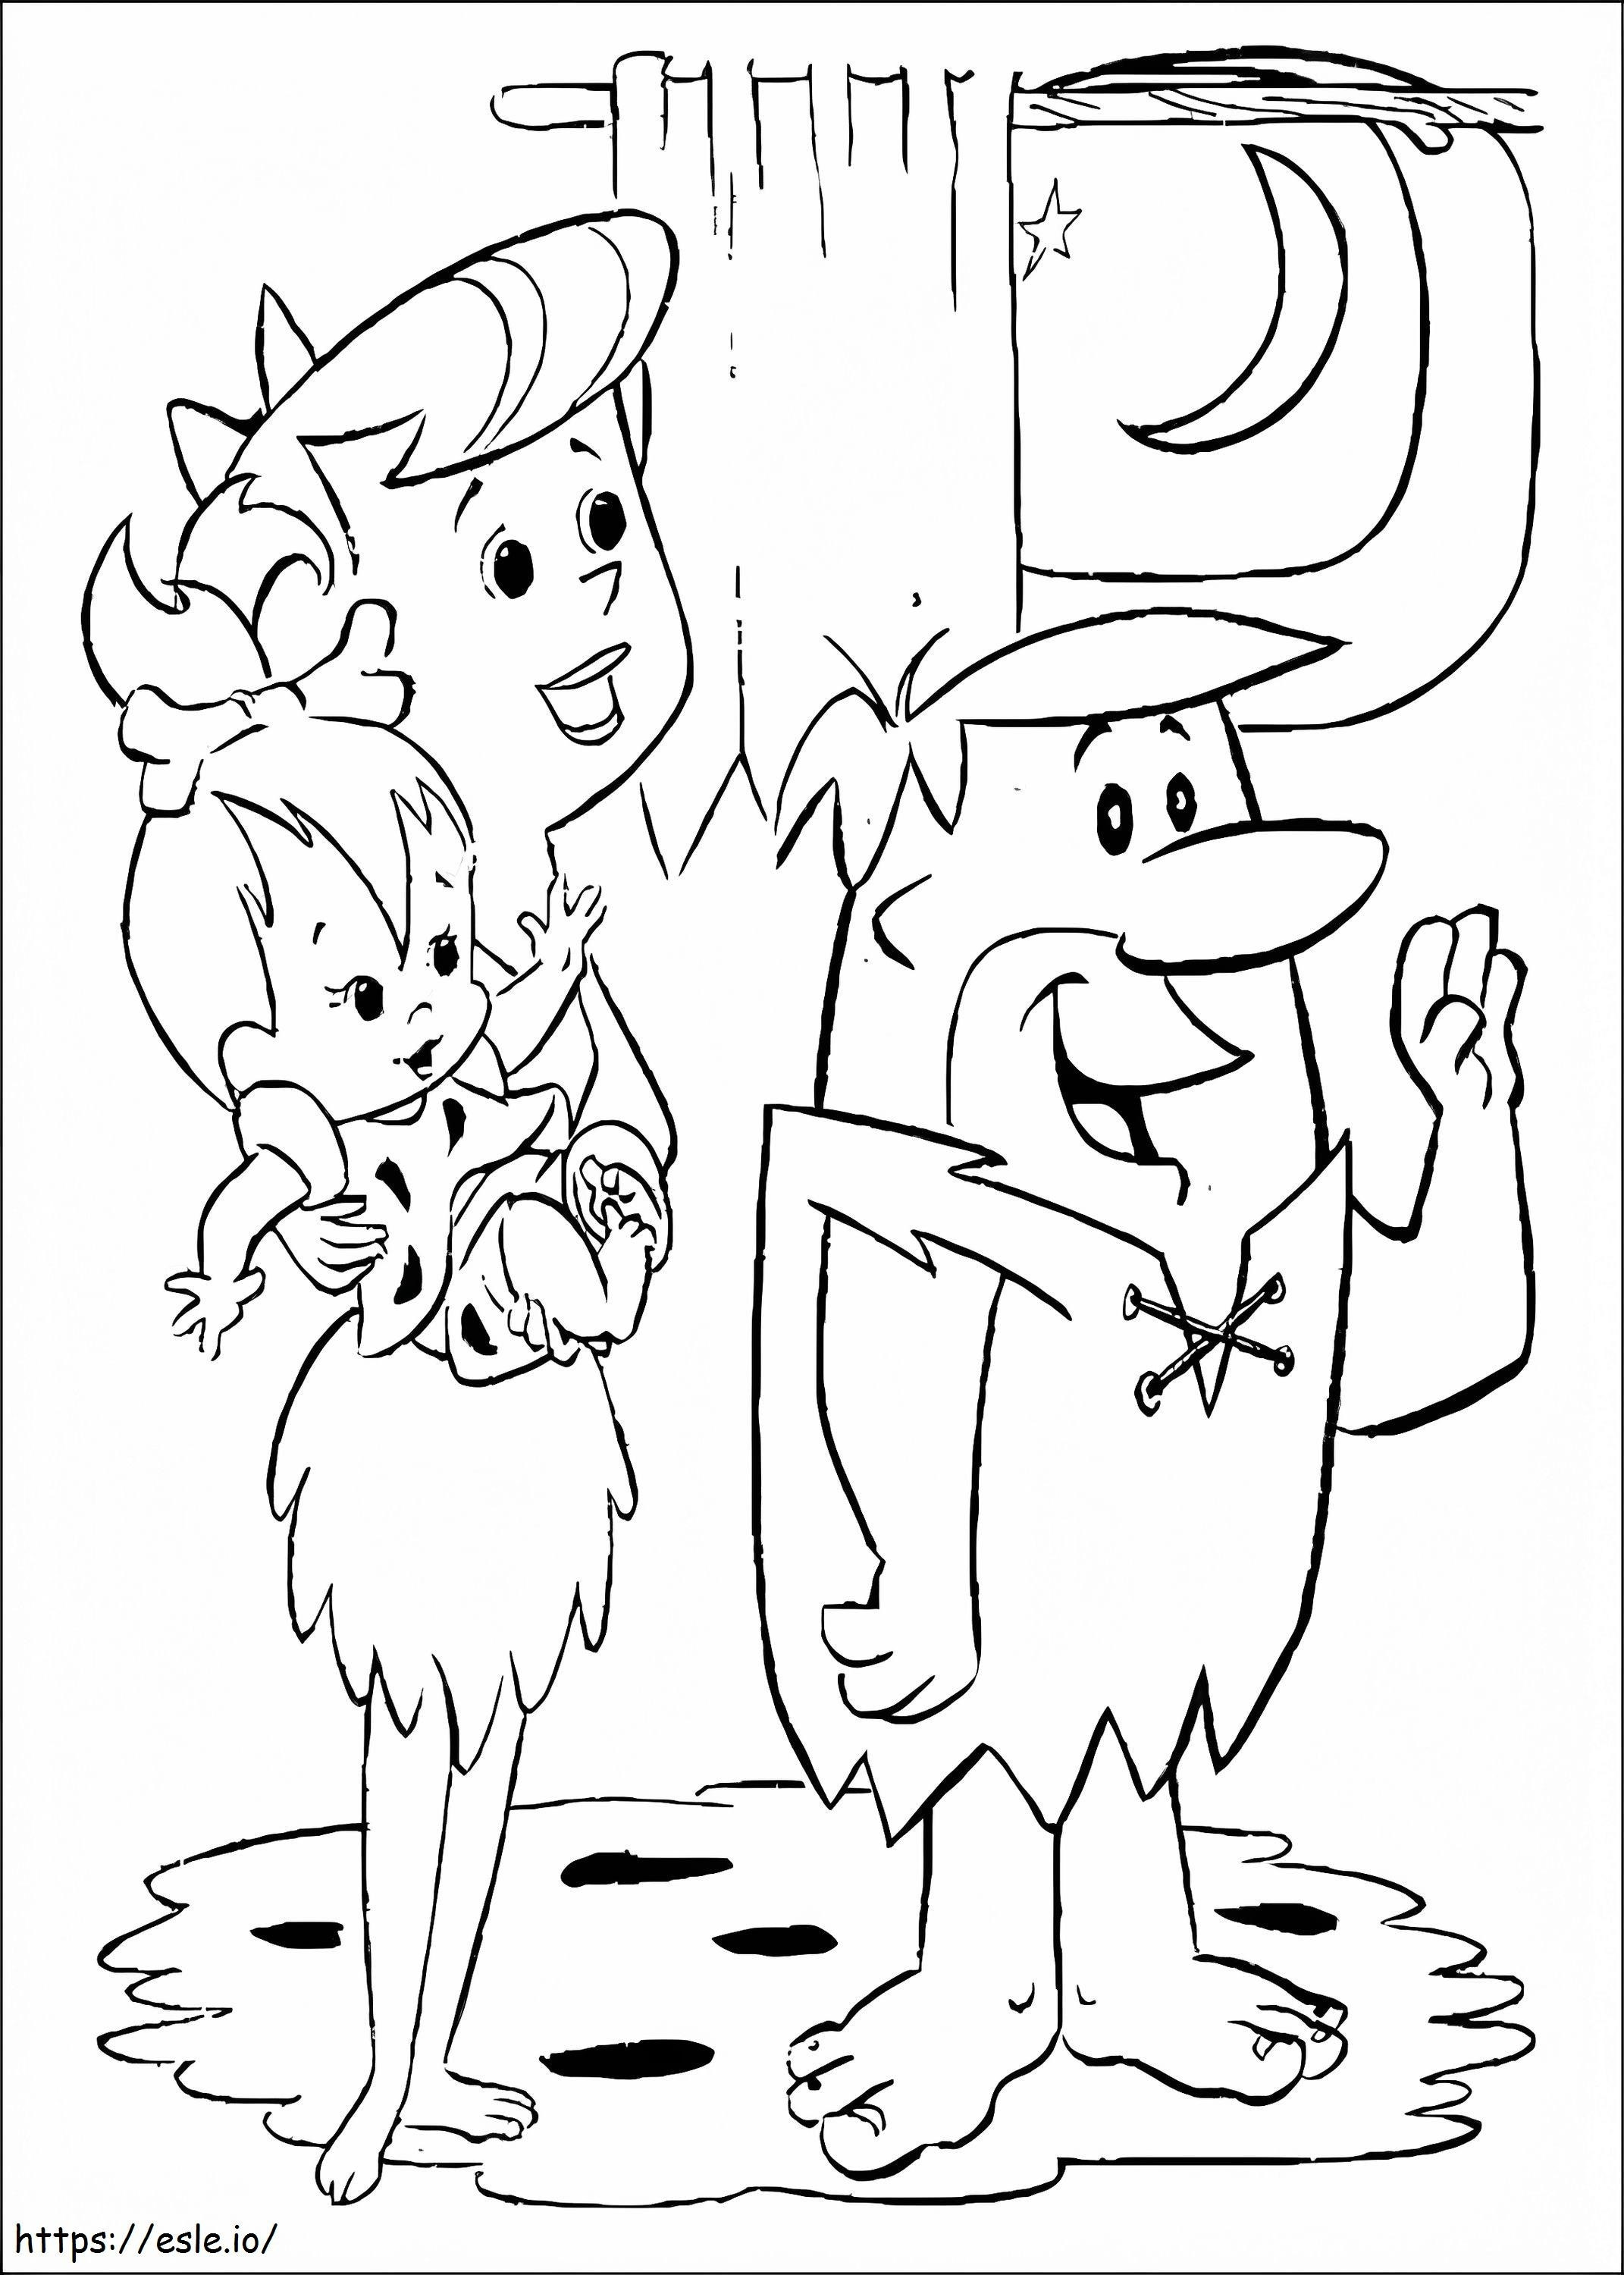 The Rubbles From The Flintstones coloring page